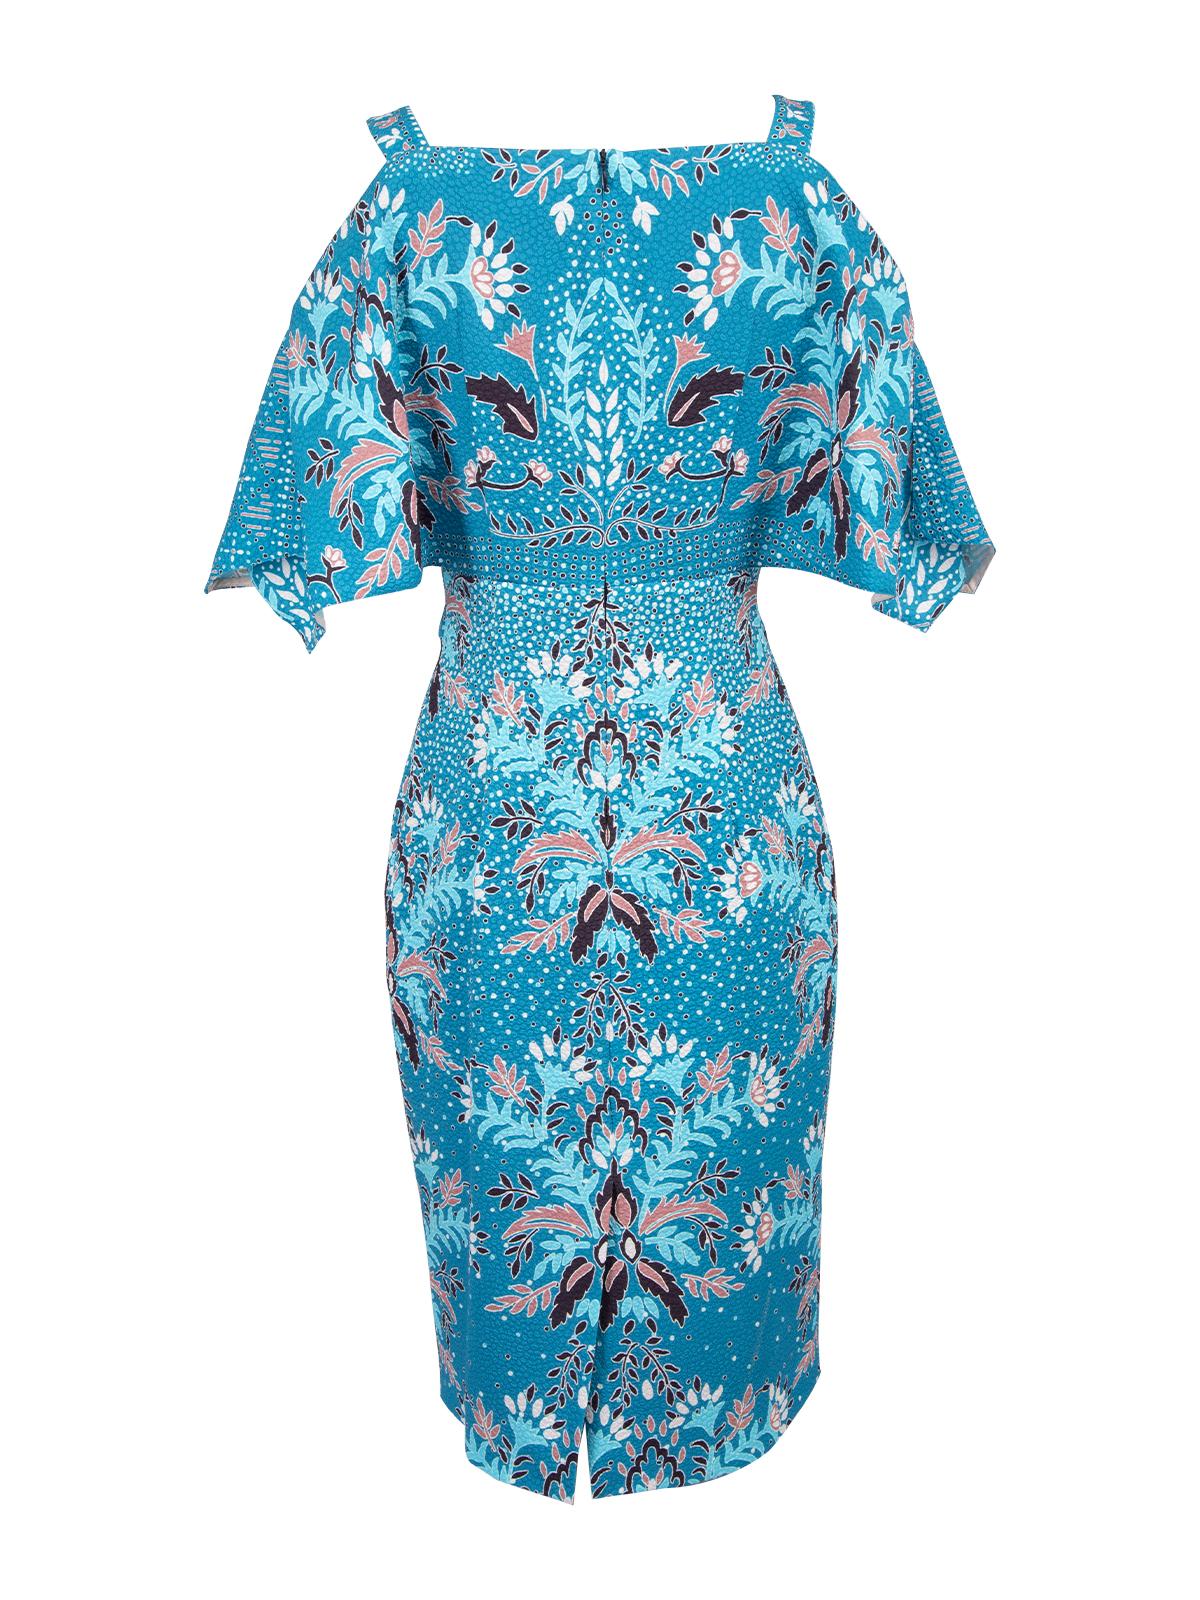 Pre-Loved Peter Pilotto Women's Patterned Midi Dress In Excellent Condition For Sale In London, GB